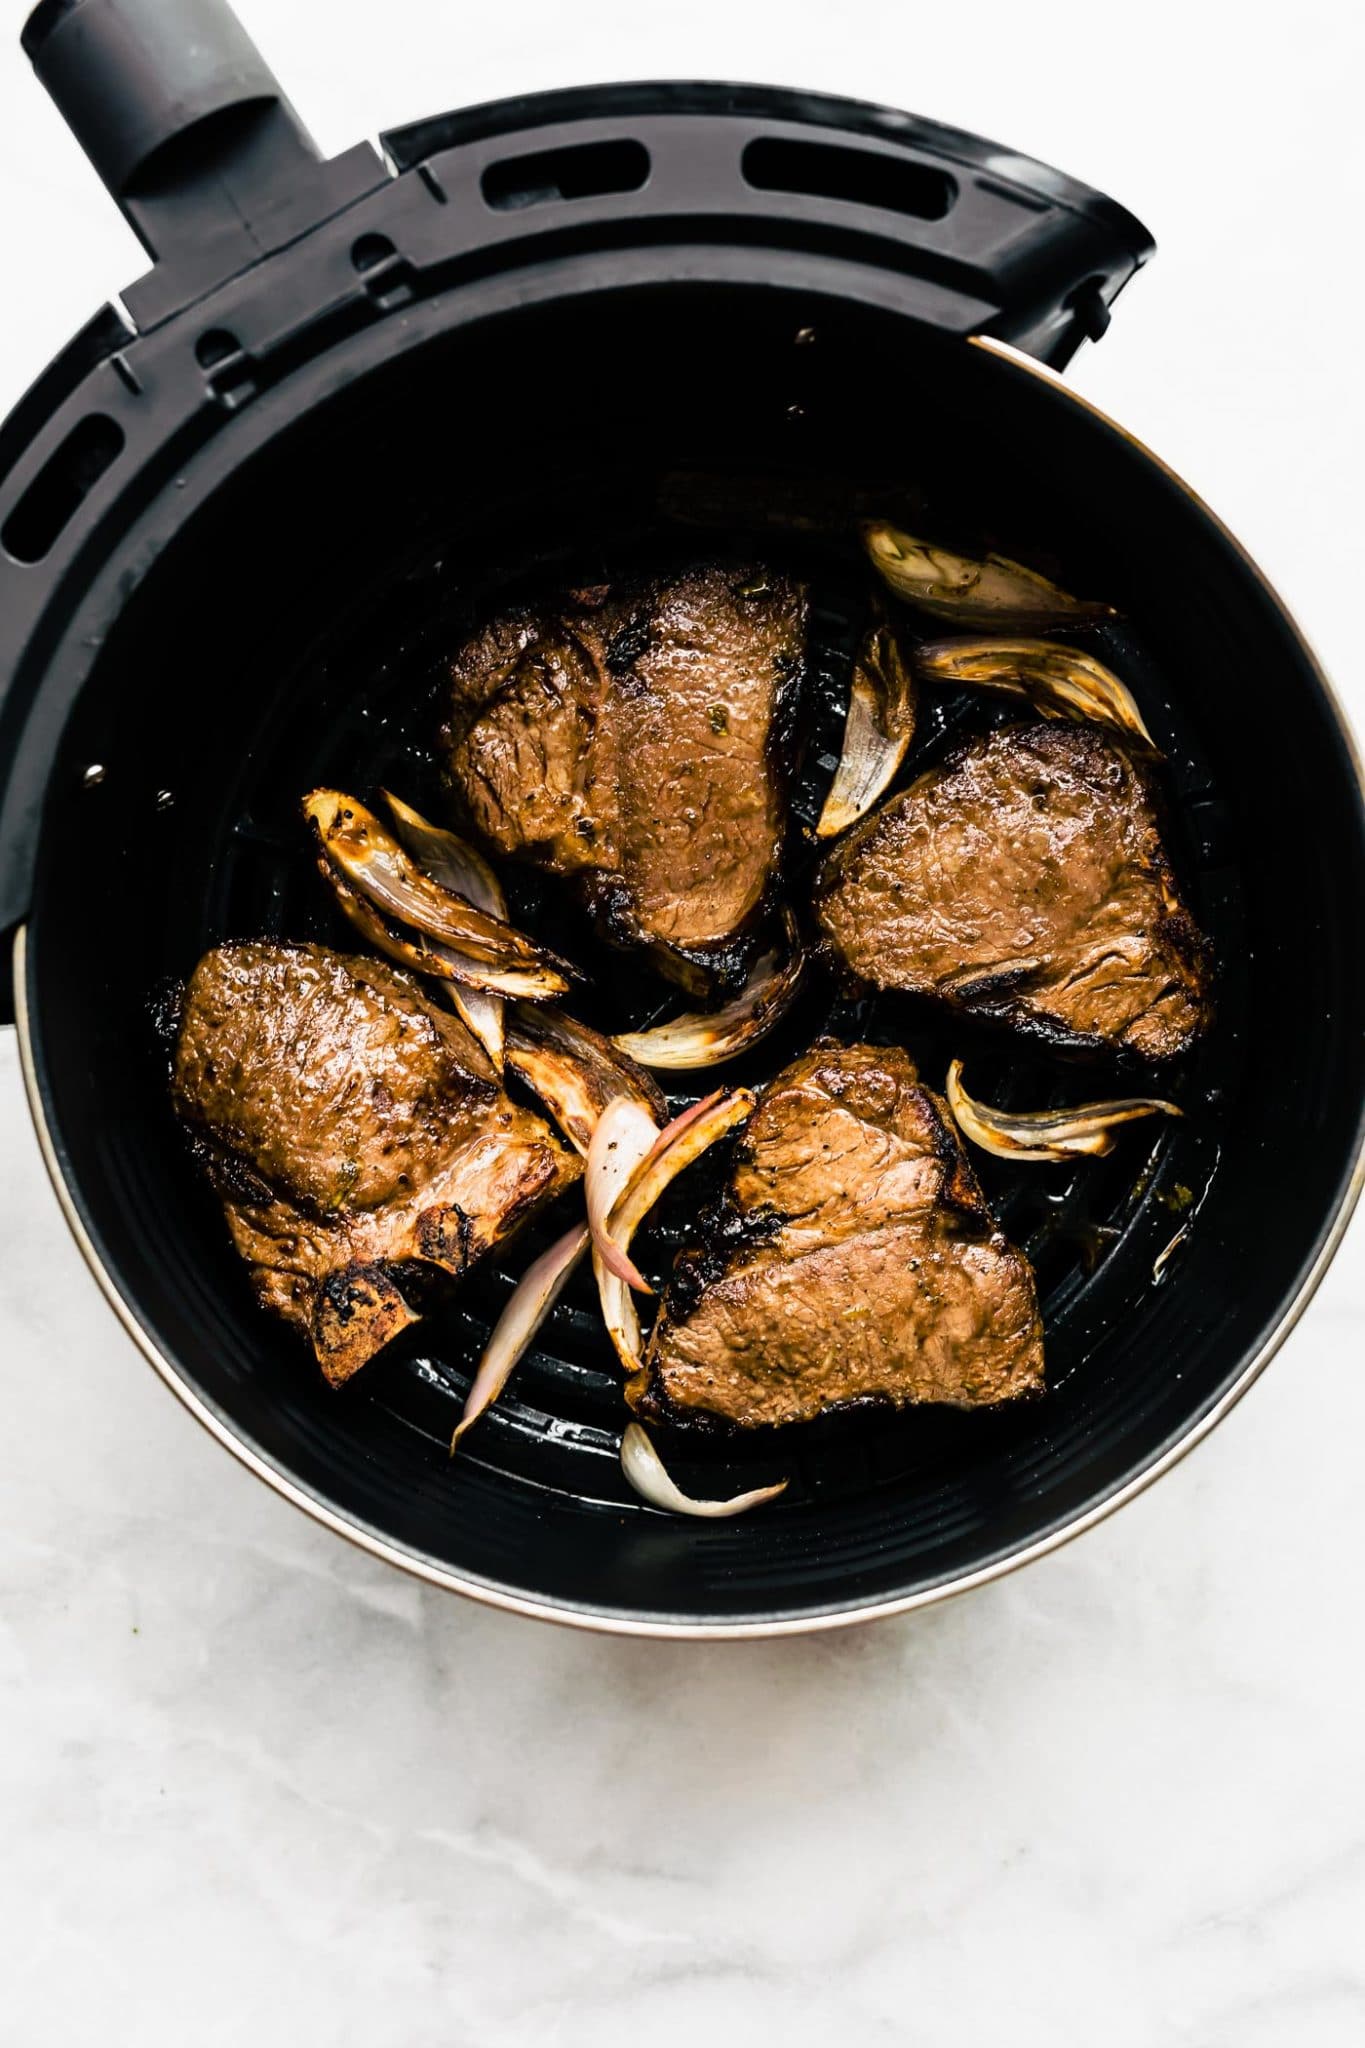 How Long To Cook Lamb Chops In Air Fryer